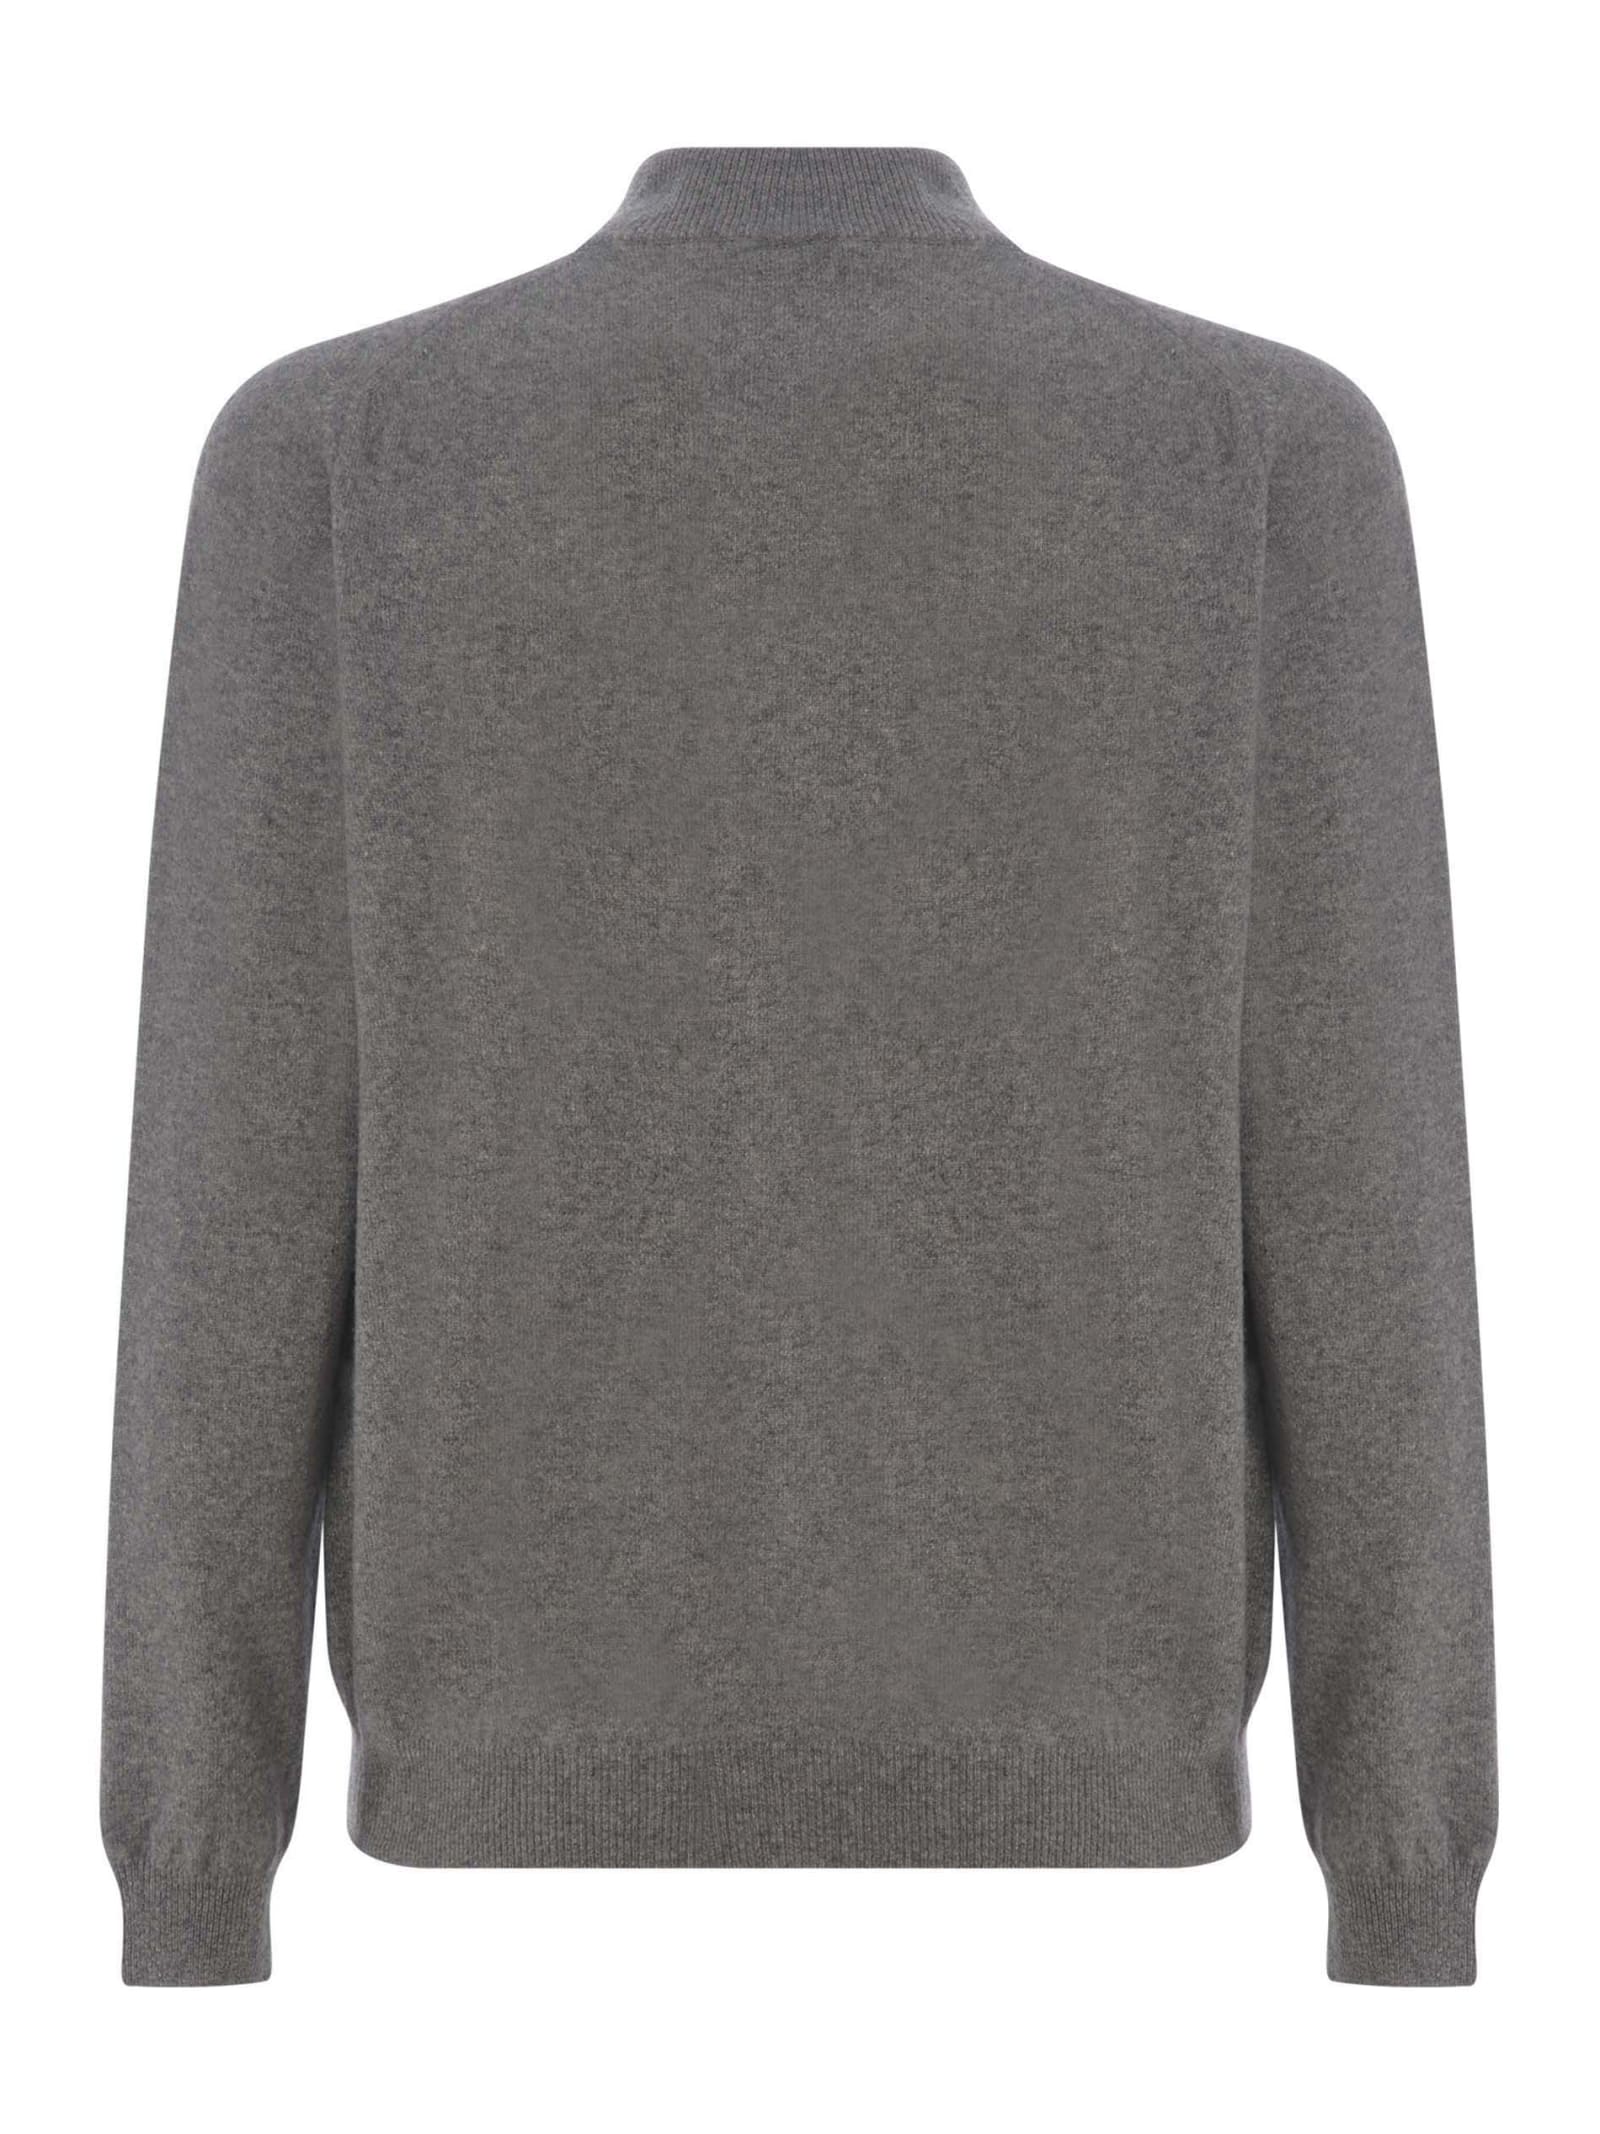 Shop Jeordie's Sweater Jeodies Made Of Extra Fine Wool In Grigio